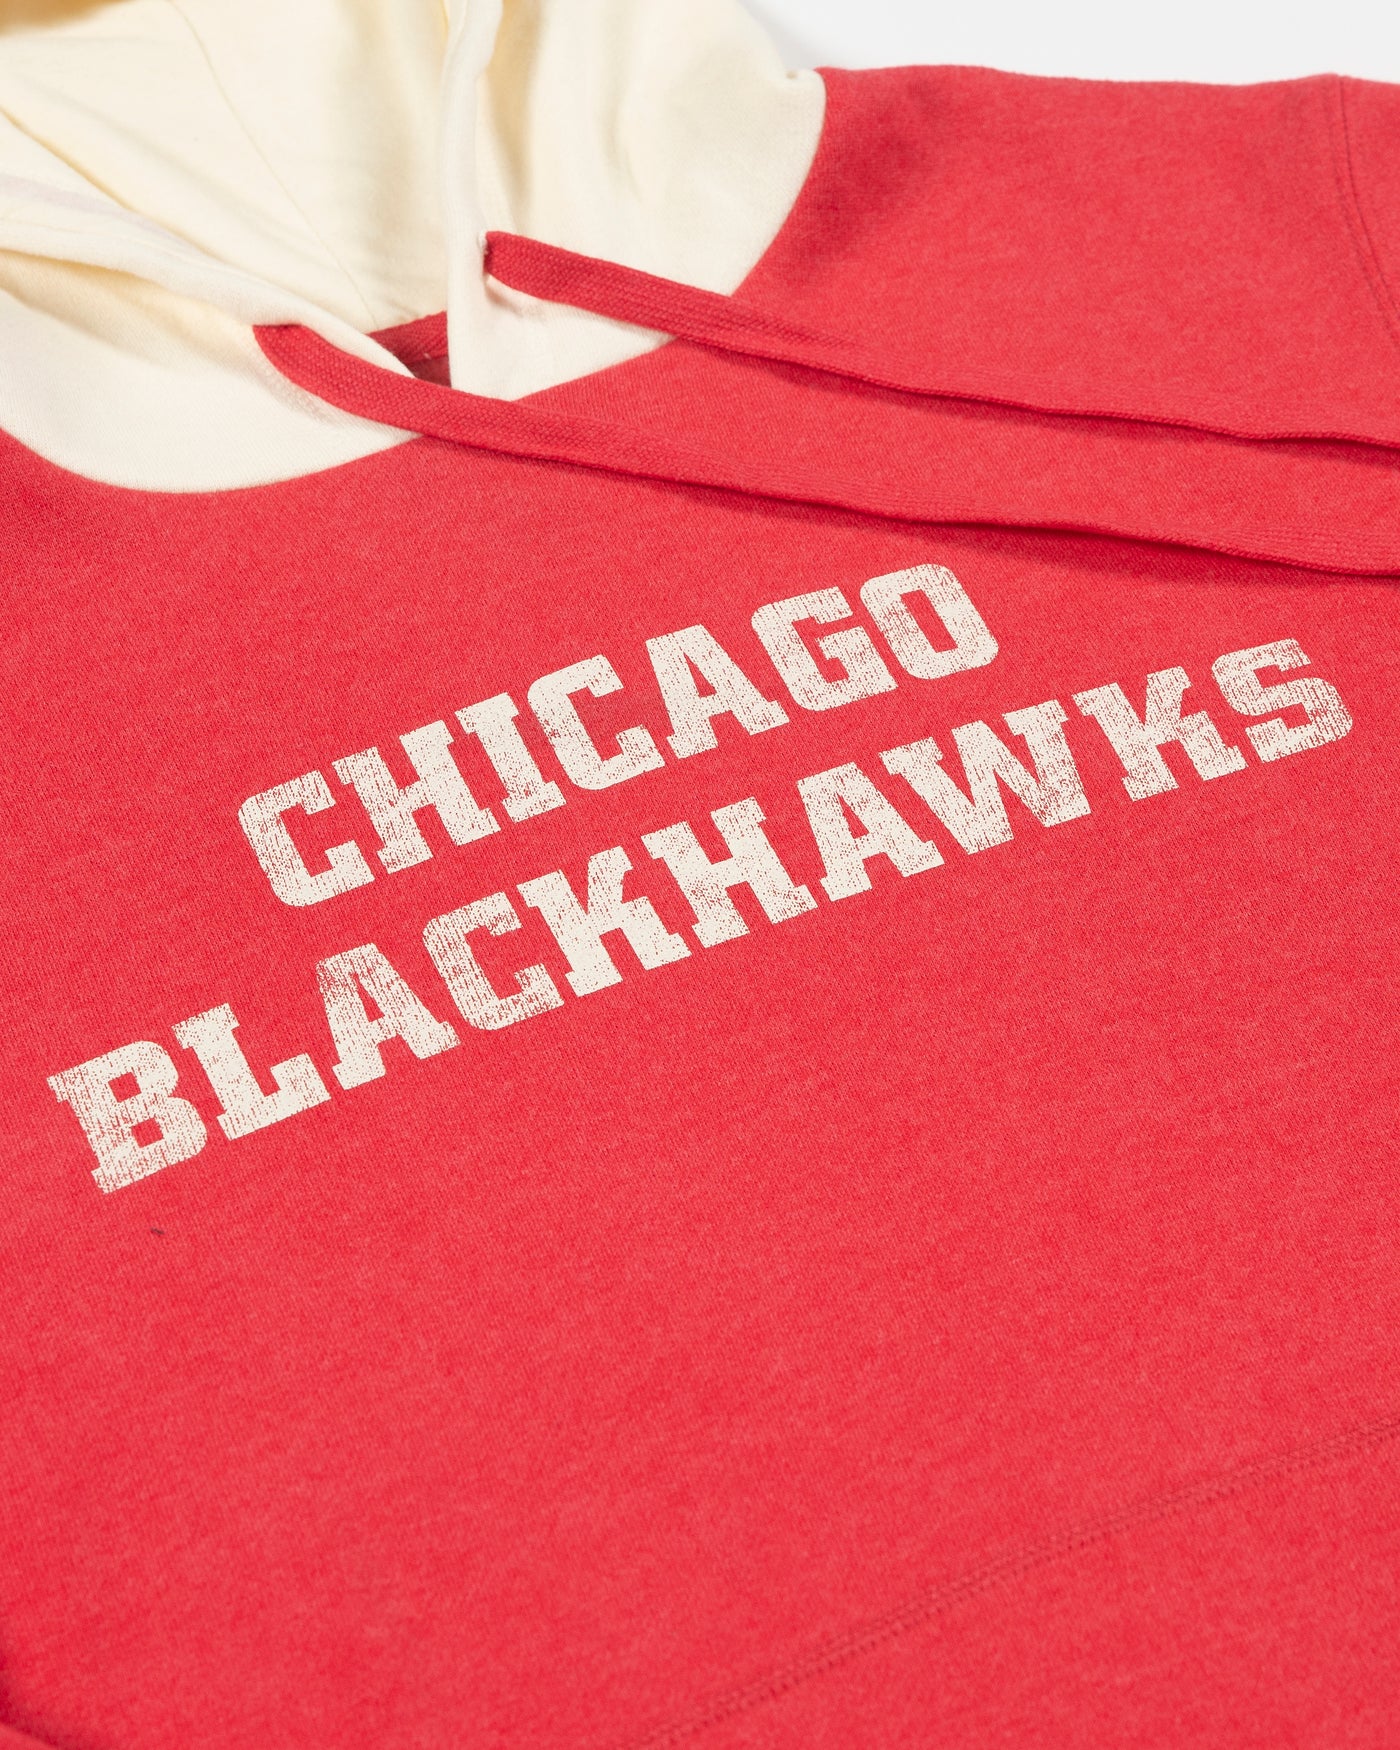 '47 brand hoodie with contrasting hood and two stripes on each arm and Chicago Blackhawks wordmark across the chest - detail front lay flat